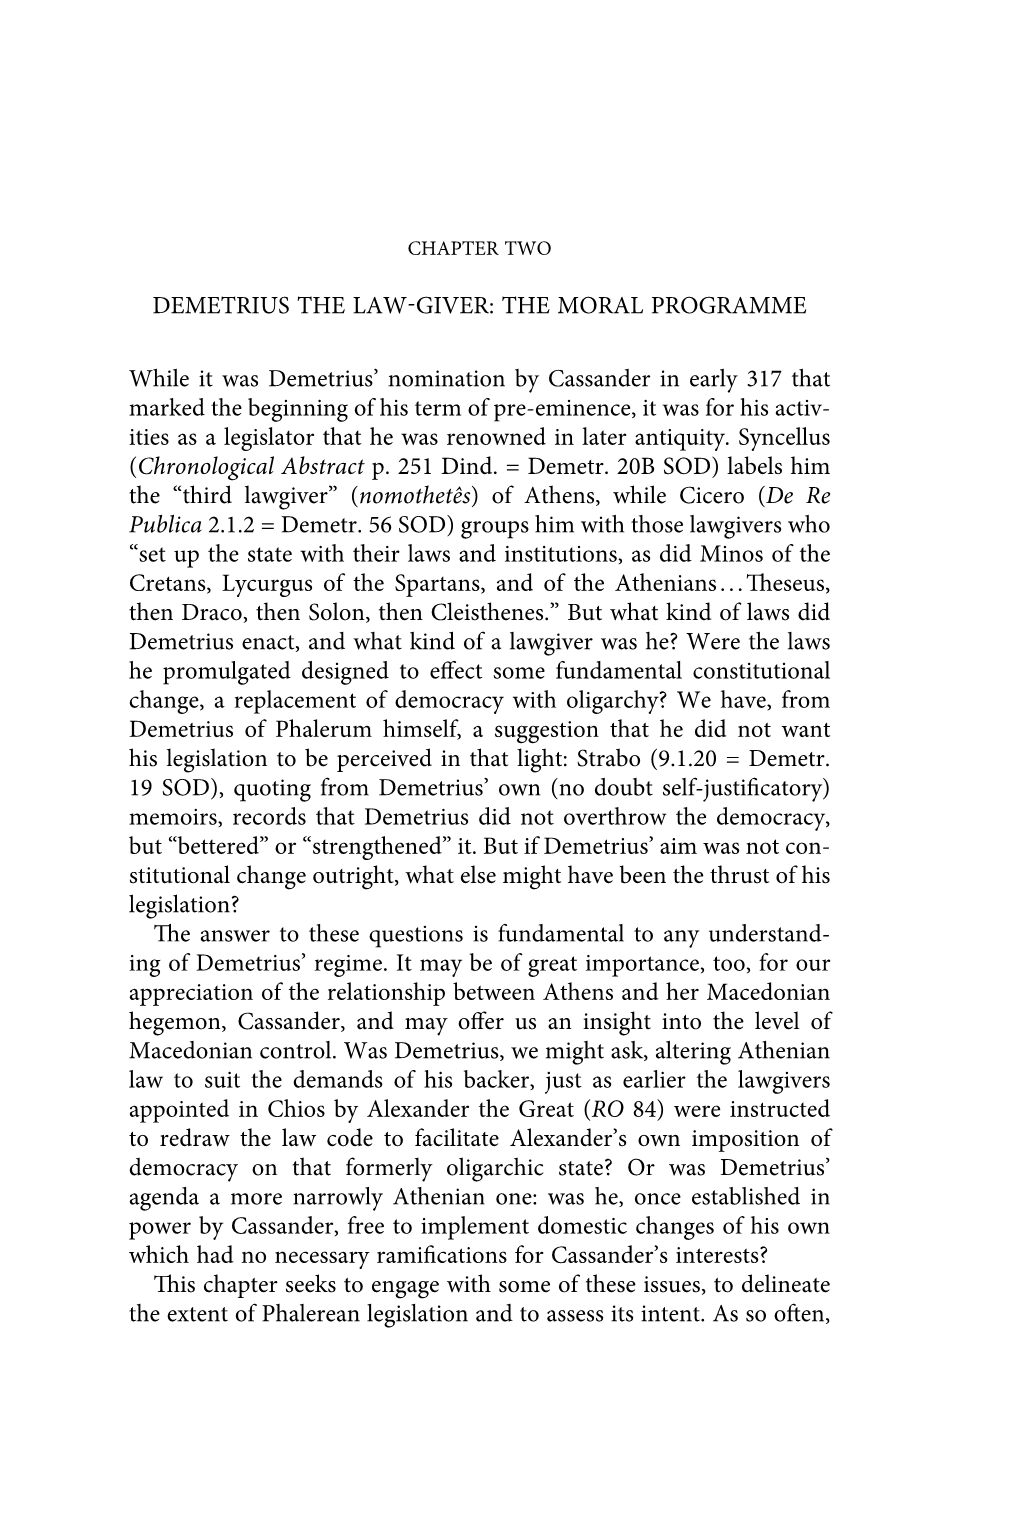 Demetrius the Law-Giver: the Moral Programme